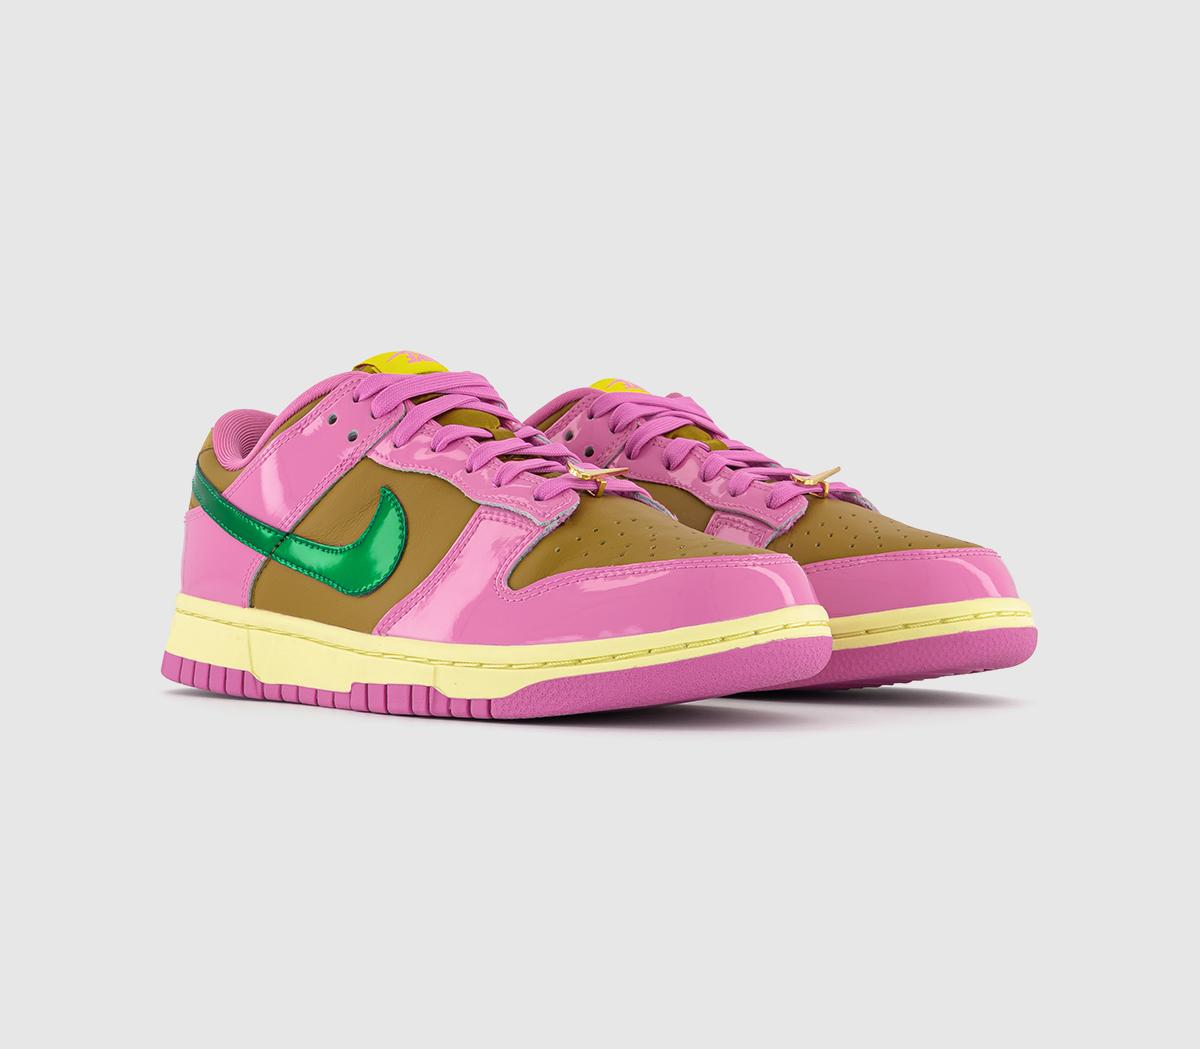 Nike Womens Dunk Low Trainers Playful Pink Multi Color Bronzine, 9